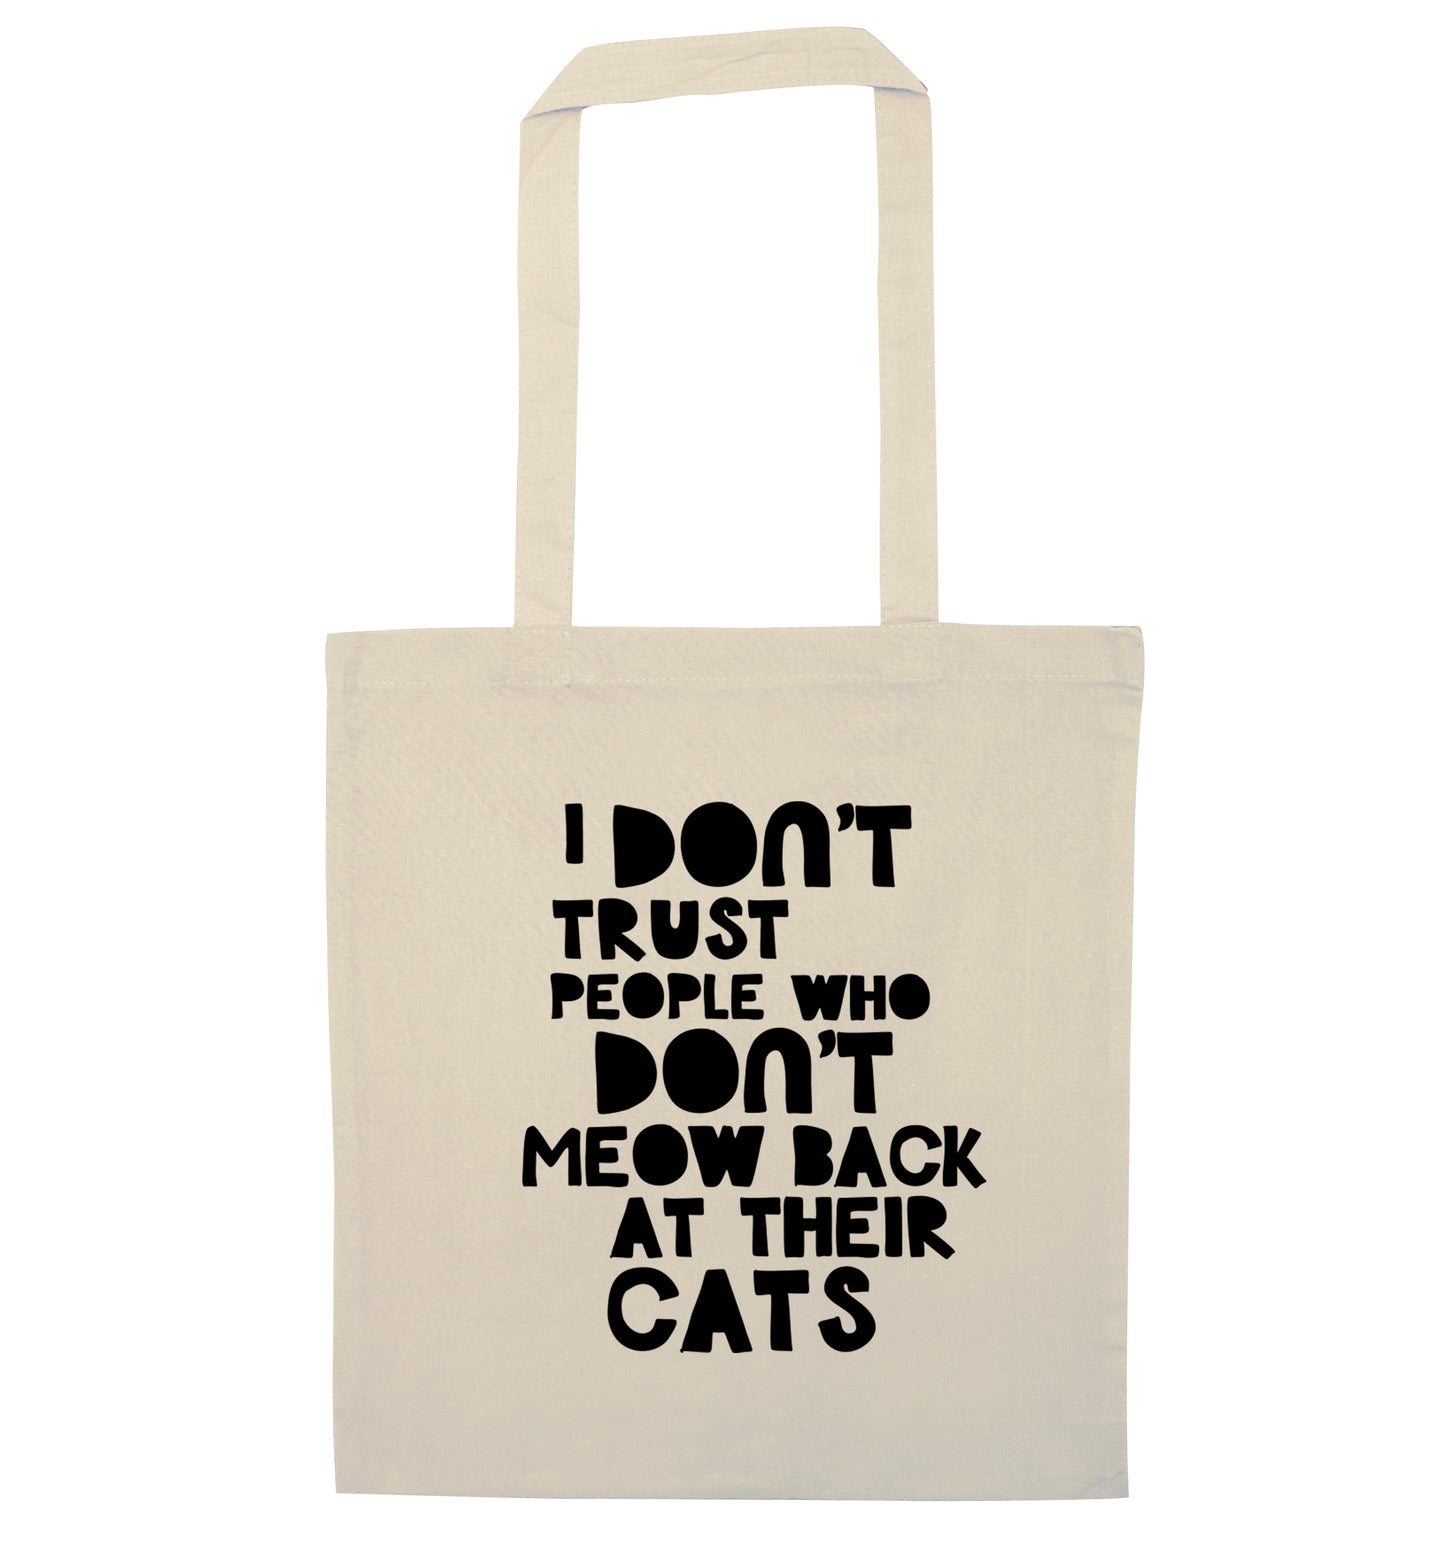 I don't trust people who don't meow back at their cats natural tote bag